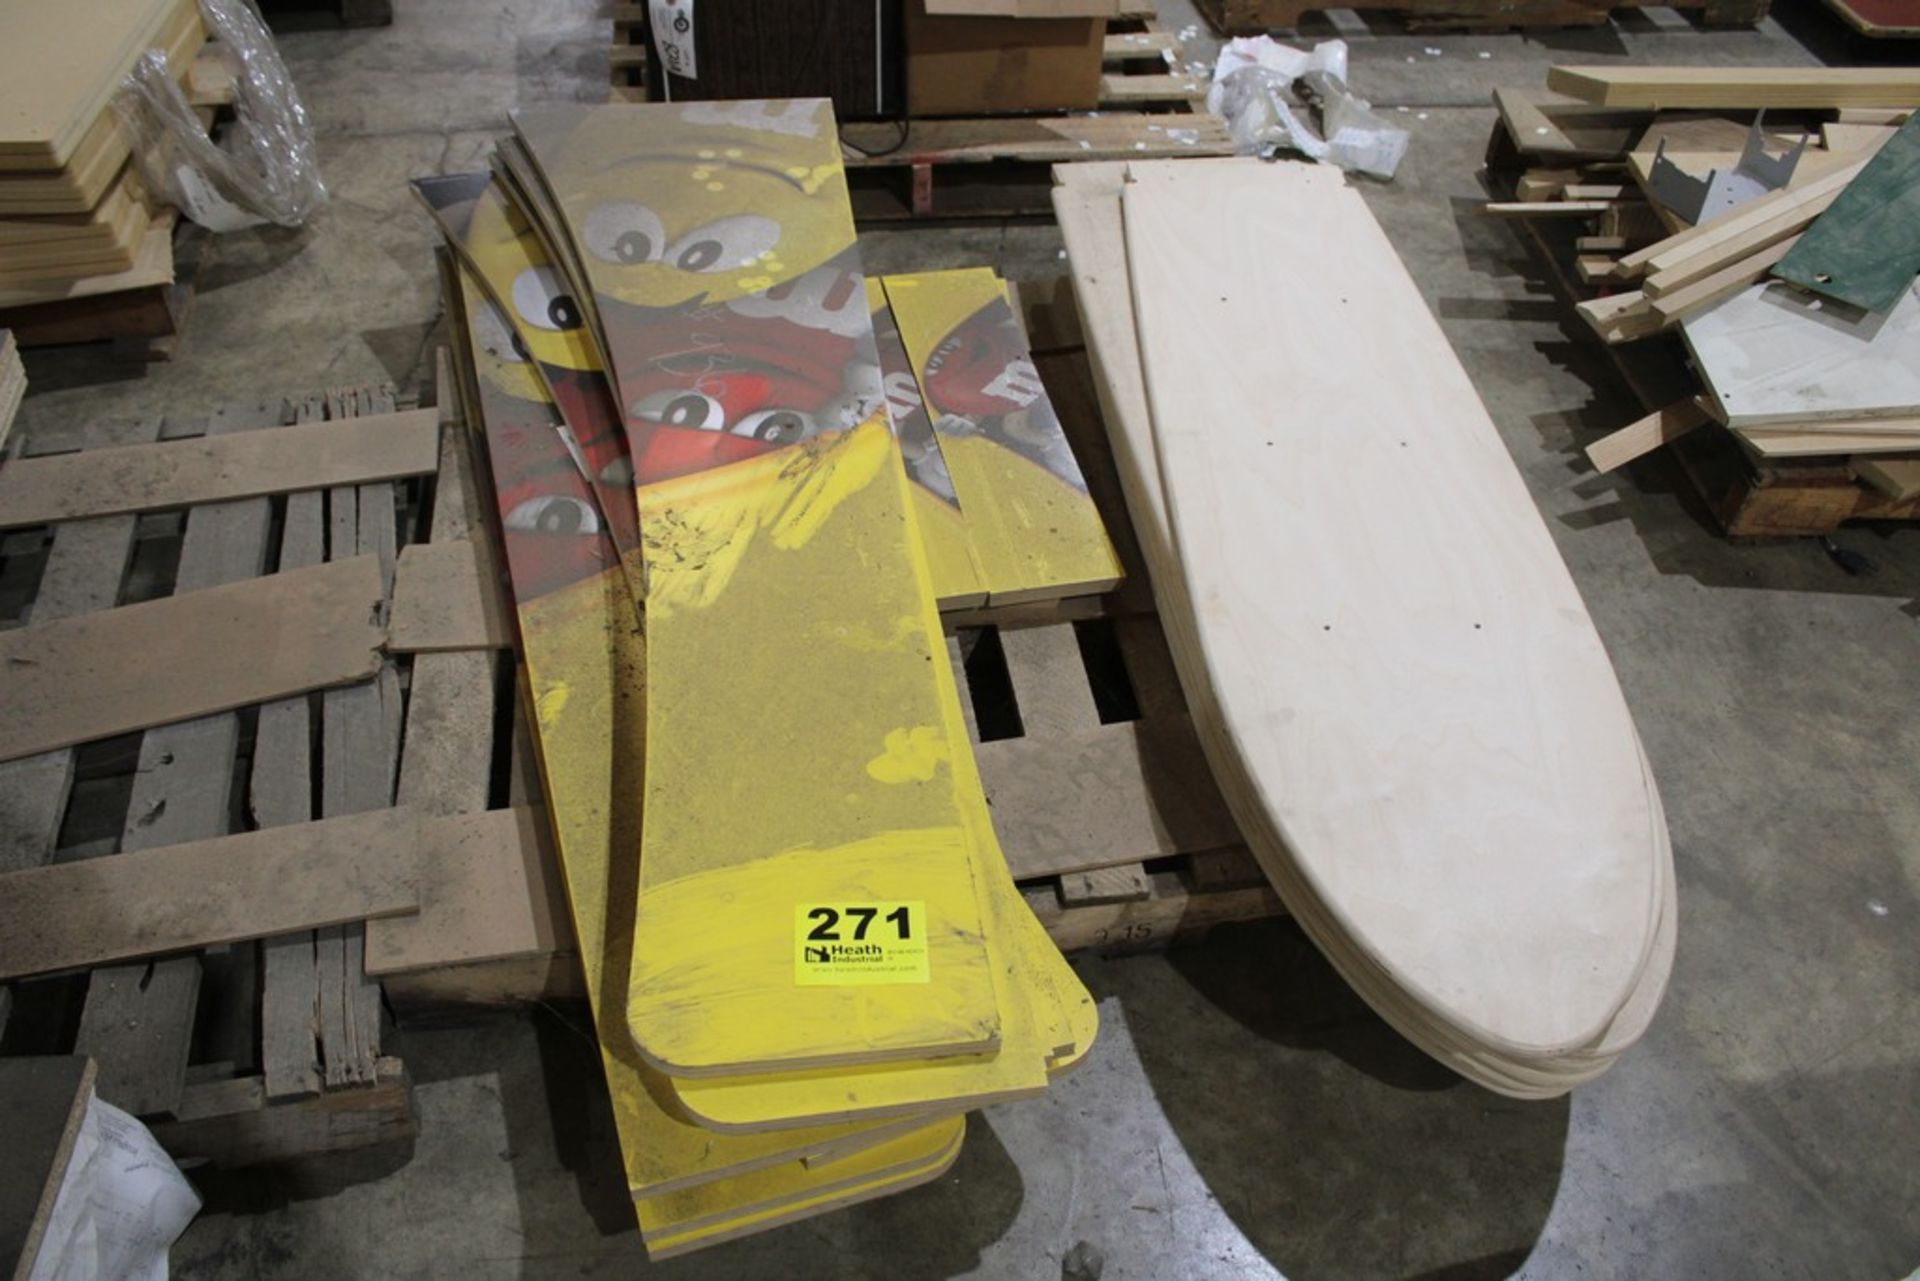 WOOD PIECES ON SKID (SURF BOARDS?)